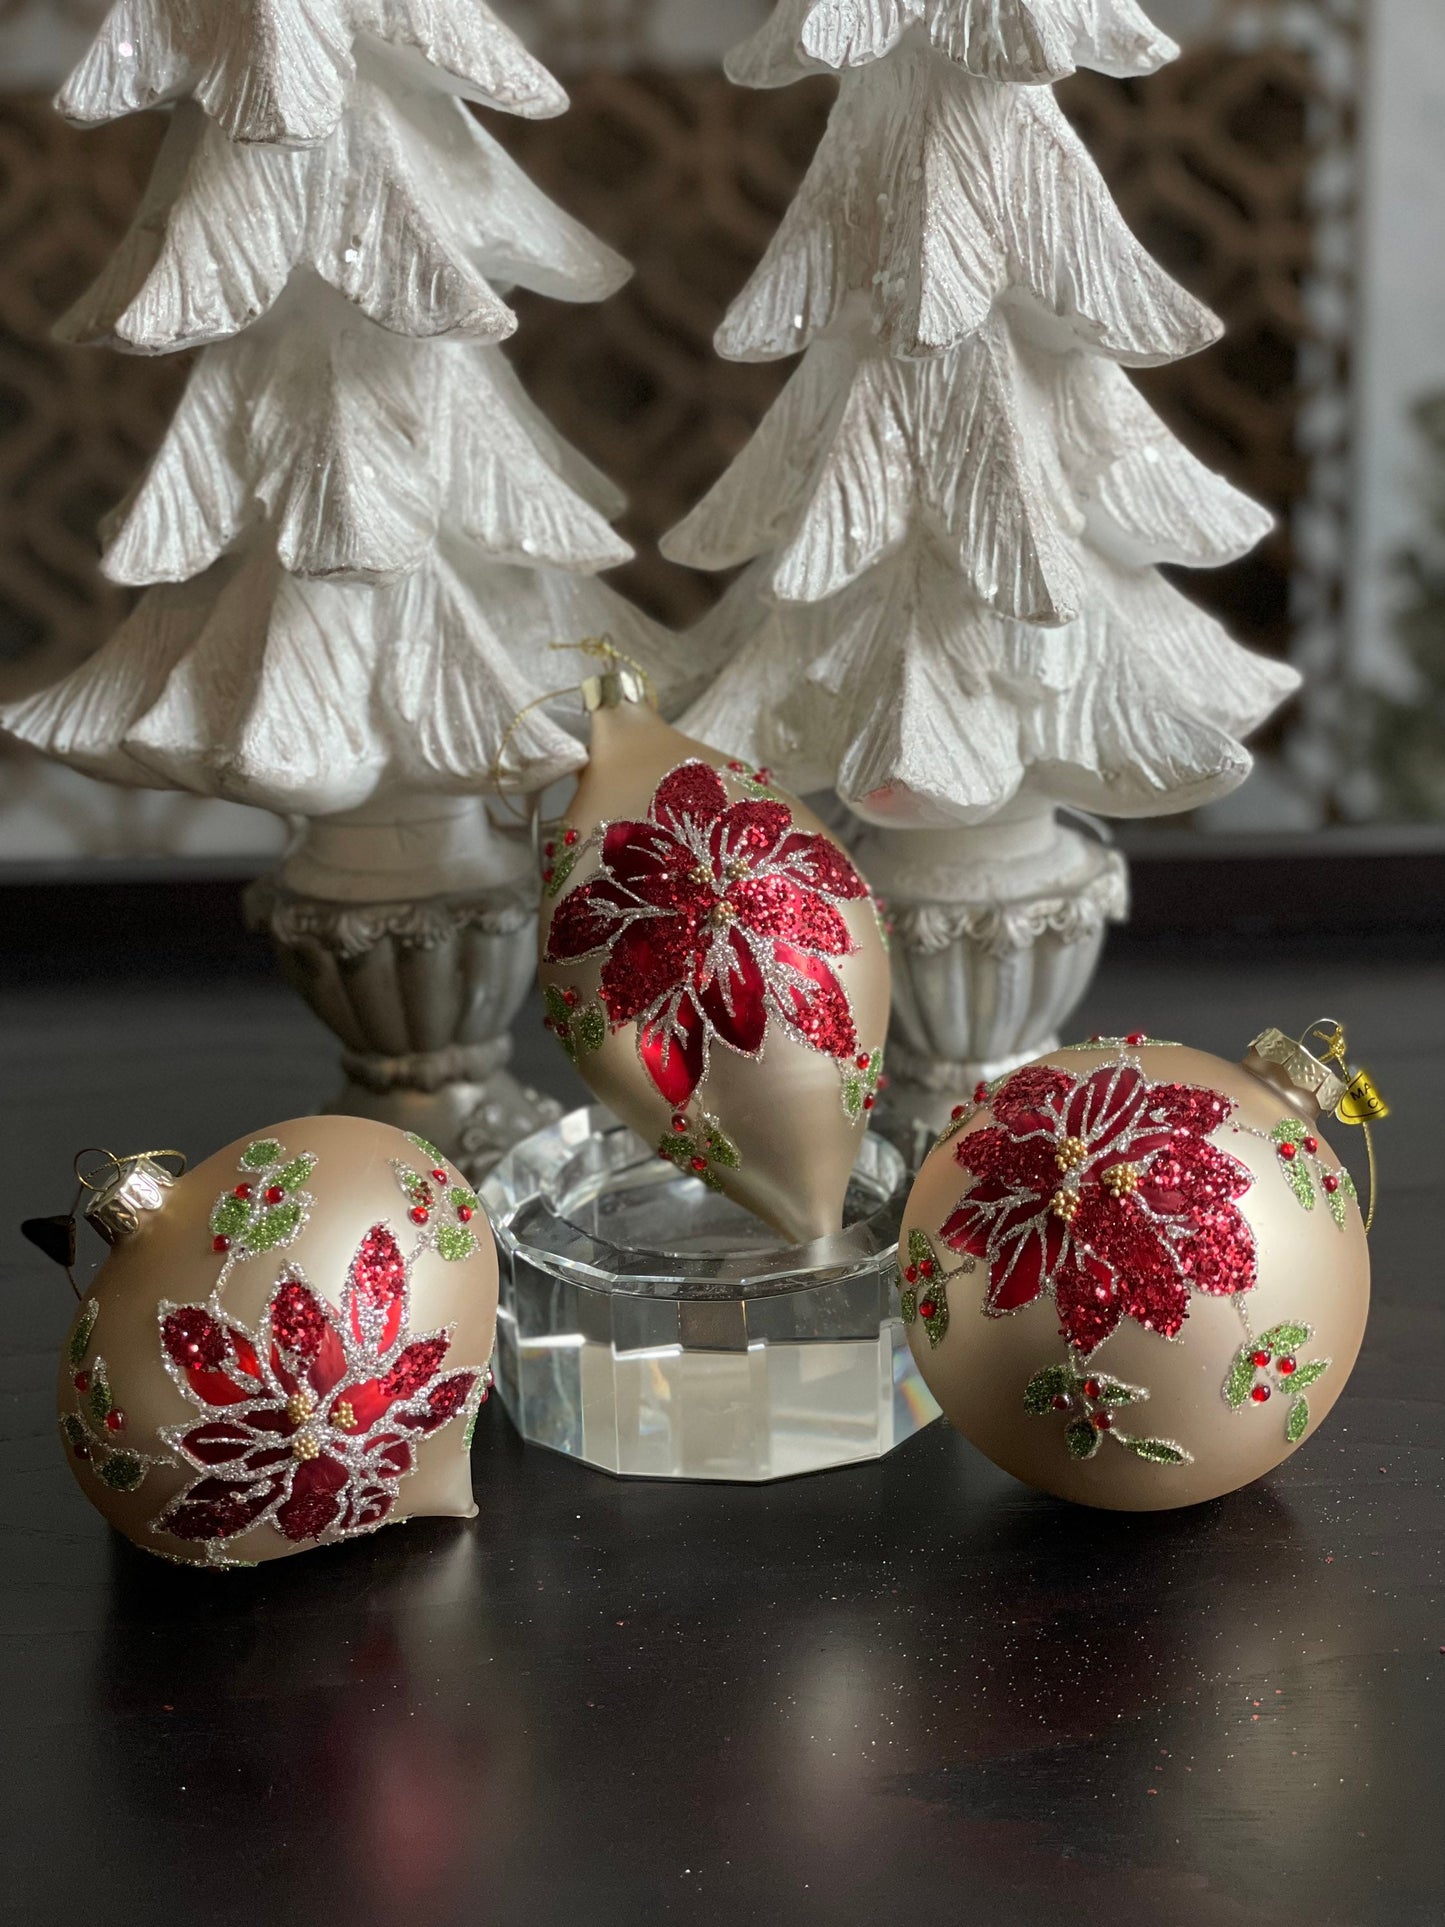 4" Poinsettia glass ornaments set of 3. Ball, onion and finial.*